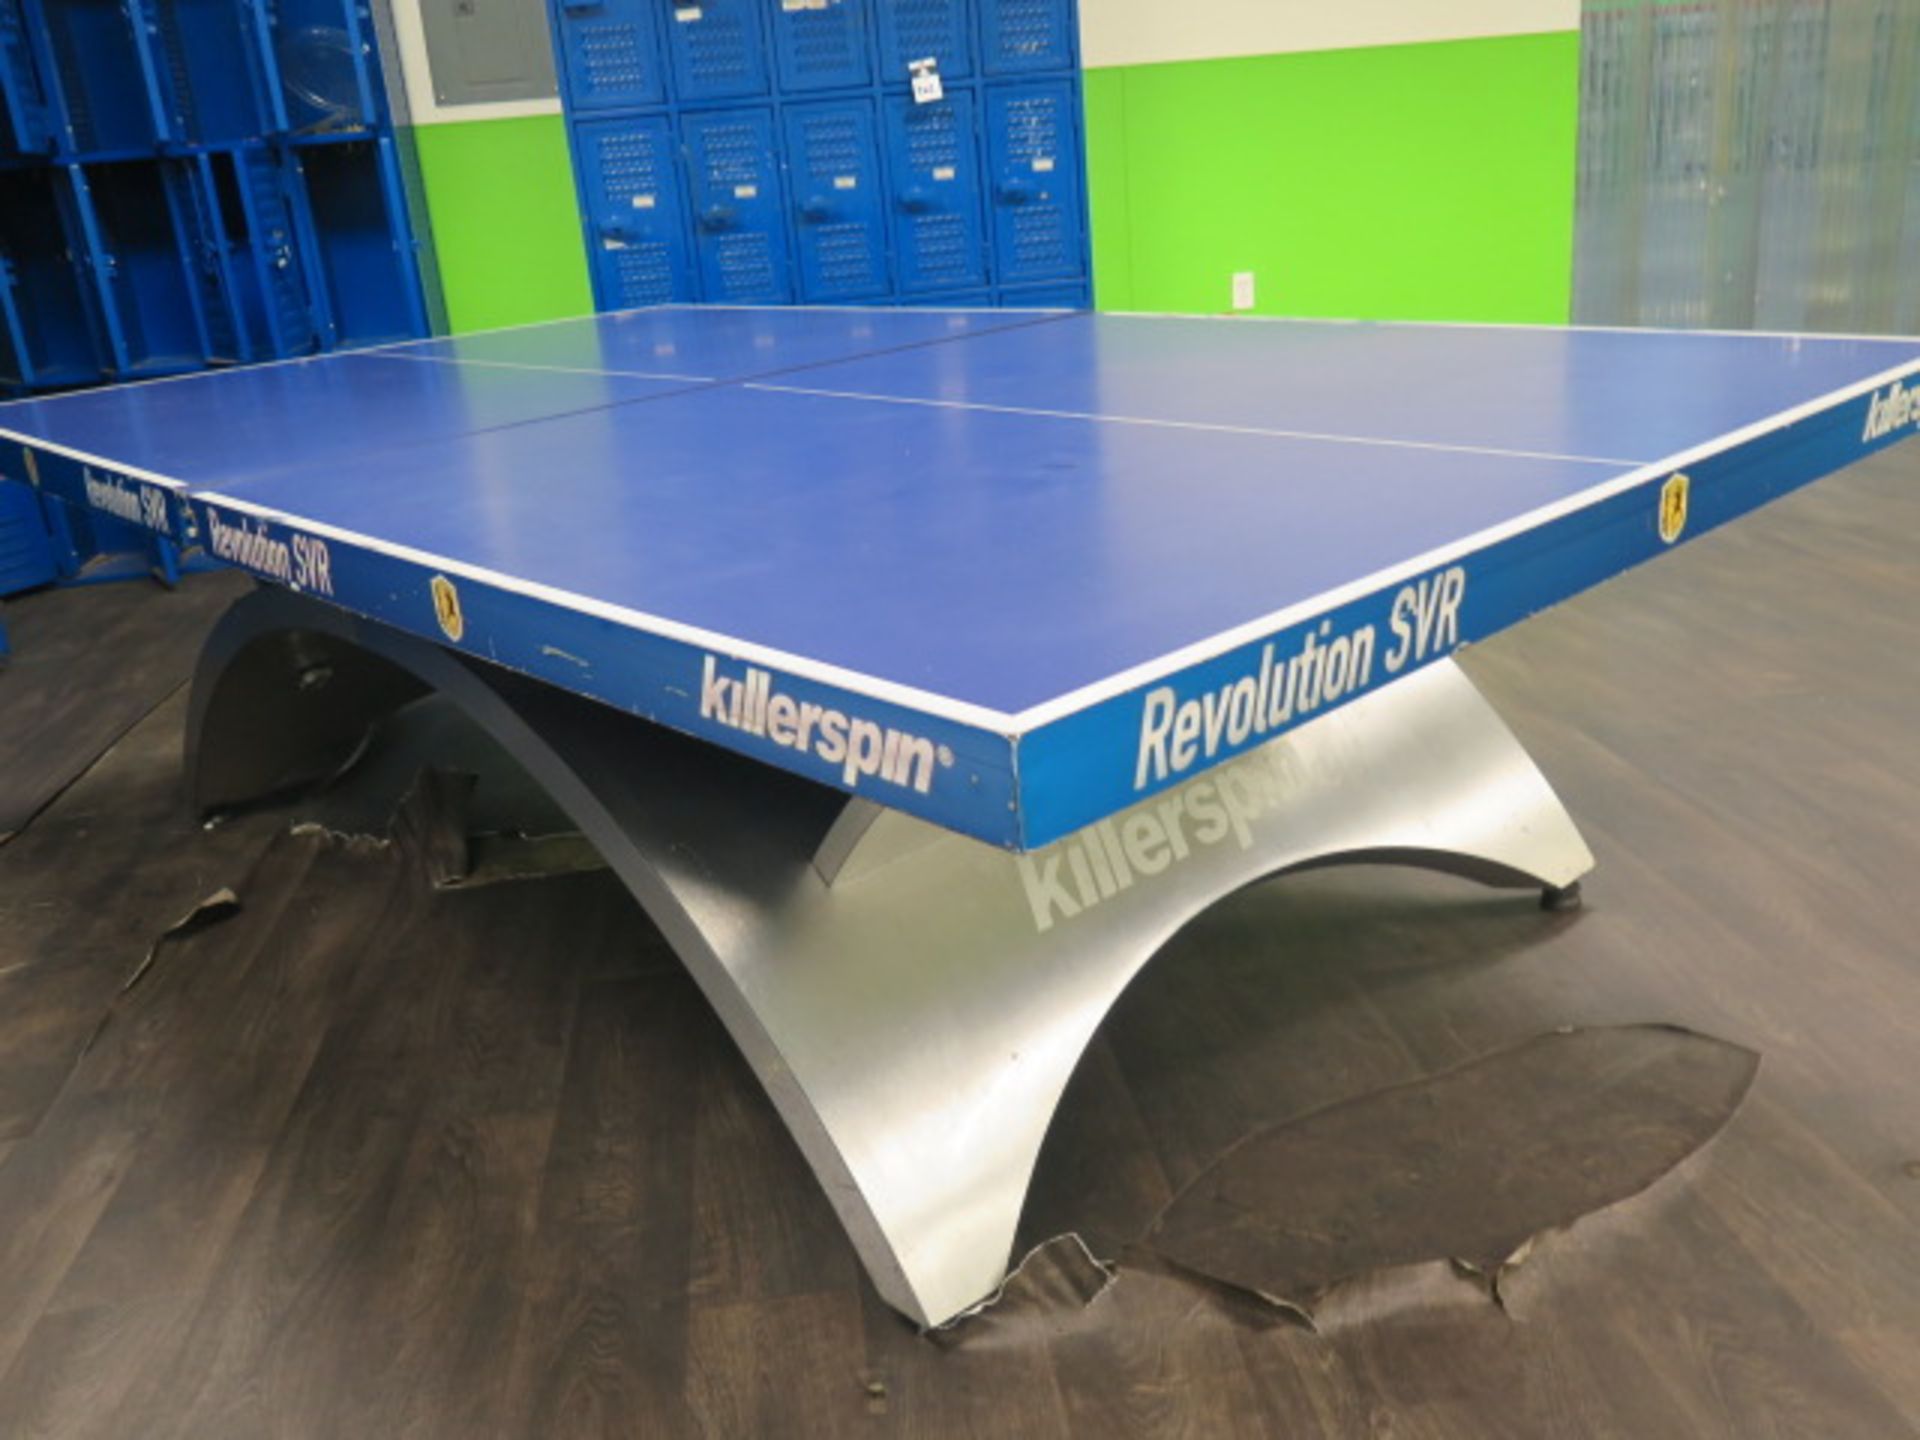 Killerspin "Revolution SVR" Professional Series Ping-Pong Table (SOLD AS-IS - NO WARRANTY) - Image 5 of 8